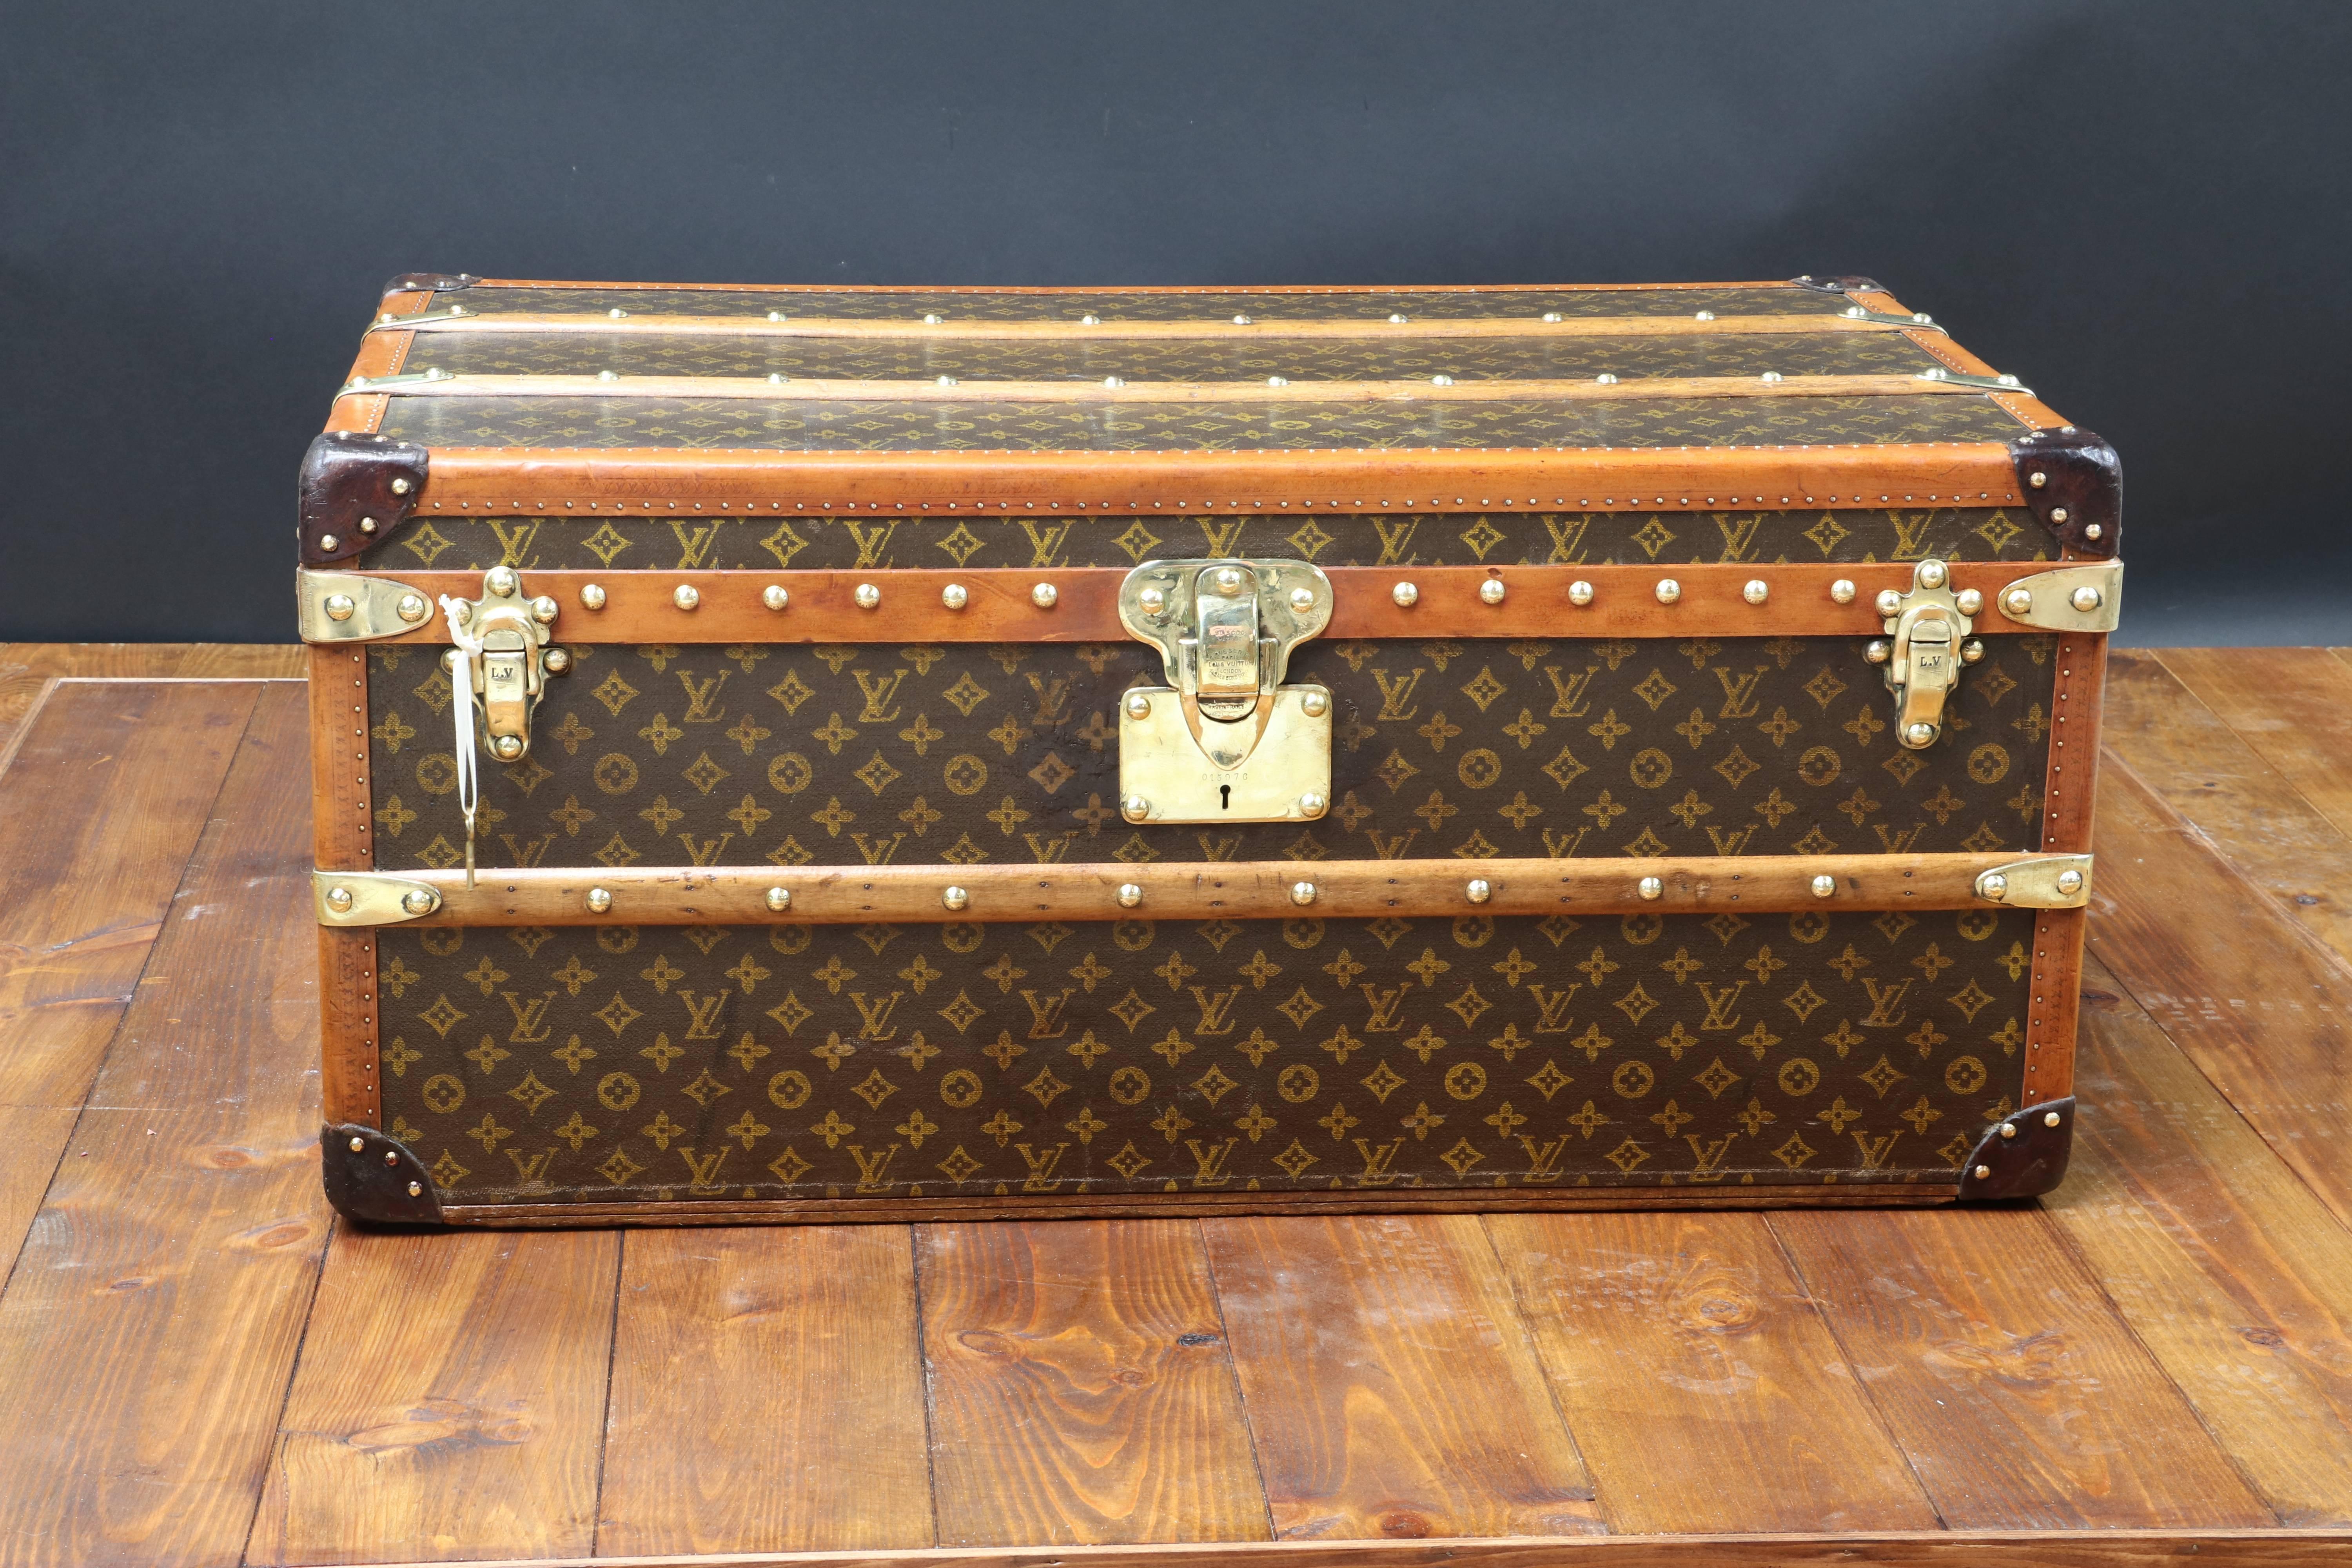 Louis Vuitton monogram leather corners.

Special height.

Brass lock with key. 

Original inside with original label. 

Leather original handel. 

Size in cm: 87 cm wide X 38 cm height X 50 cm deep. 

Malle Louis Vuitton monogram.